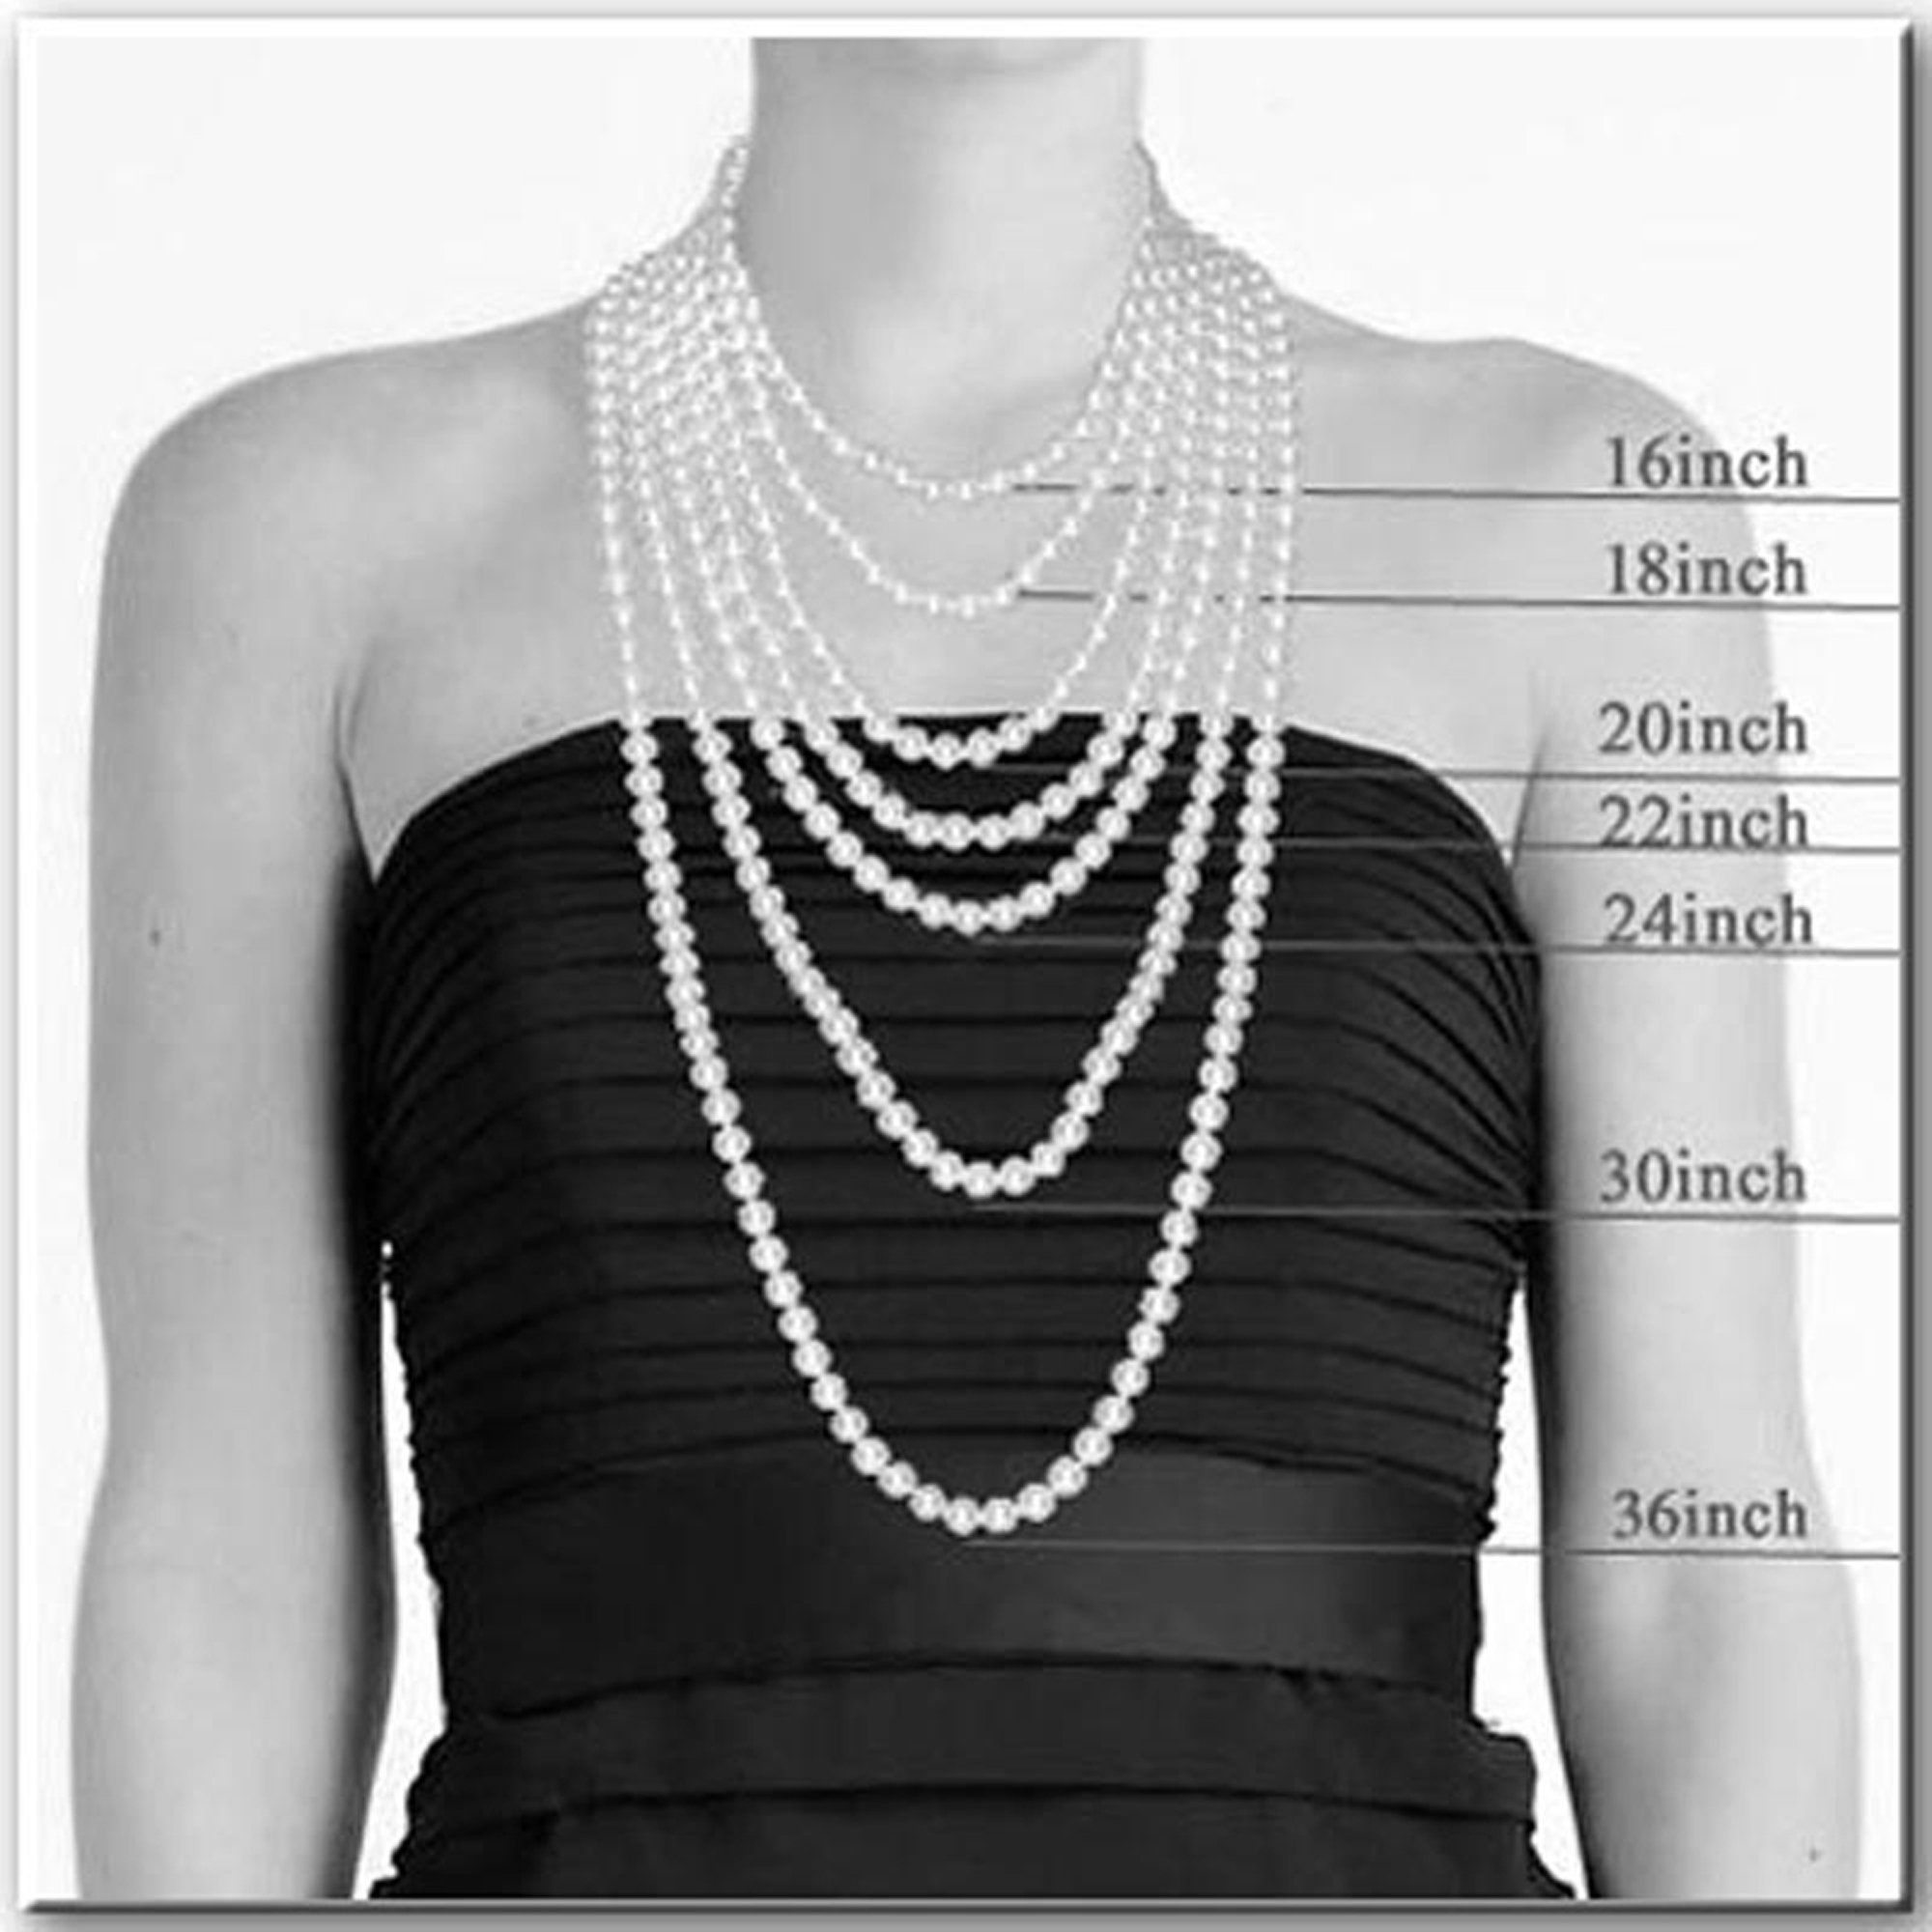 6 Layer Good Quality Pearl Chain Necklace